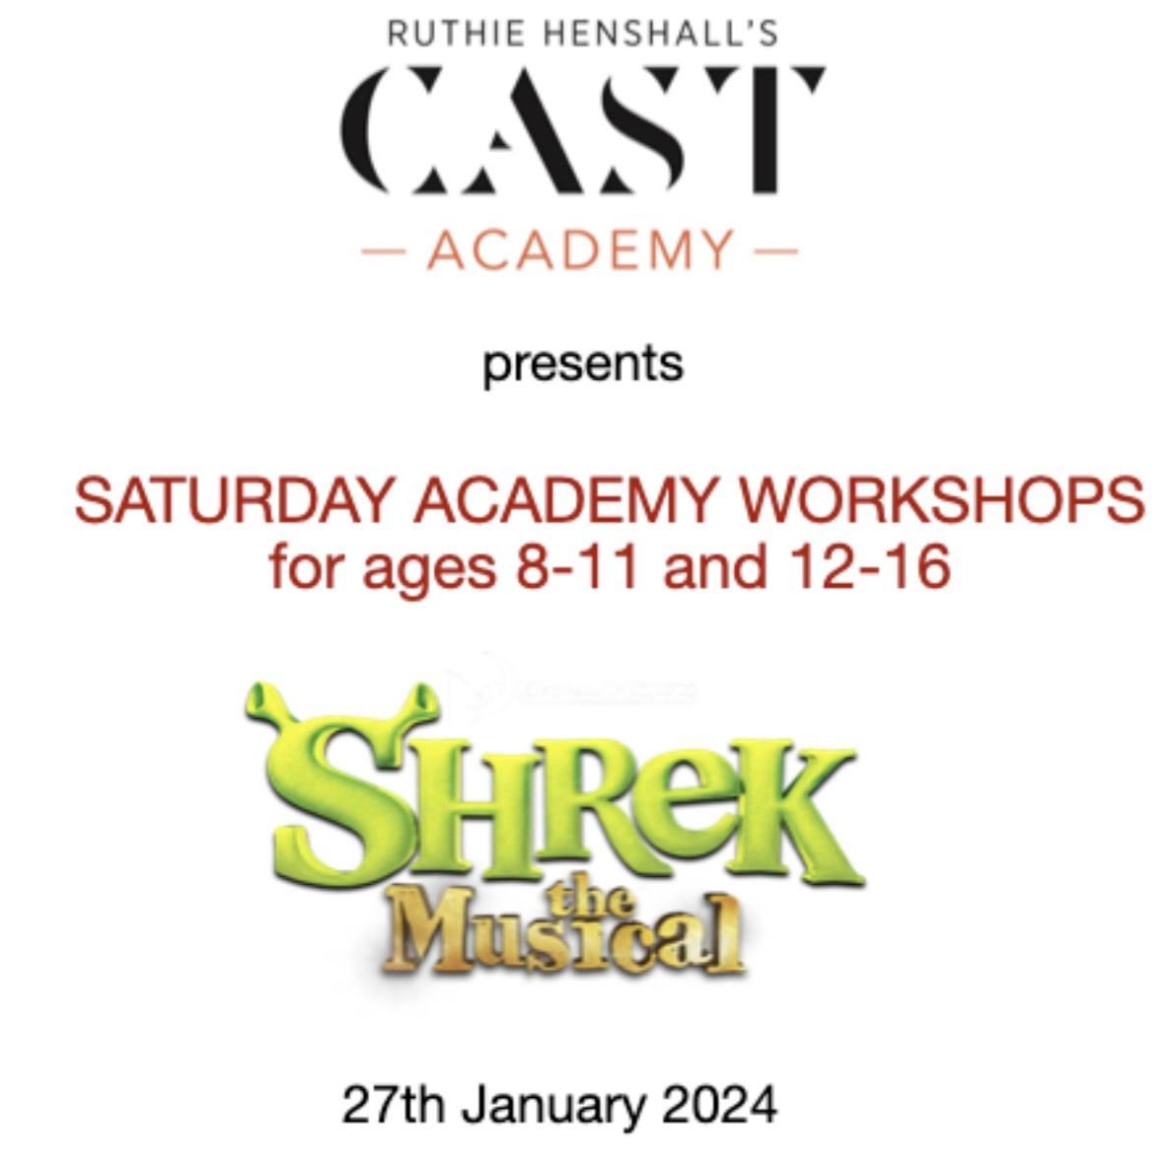 Our 2024 Saturday MT workshops kick off on 27th January 24 with Shrek the Musical - led by an original UK production cast member - if you have a budding performer in the making then set them off on their journey by learning from industry pro's. BOOK NOW - ticketsource.co.uk/whats-on?q=RHC…